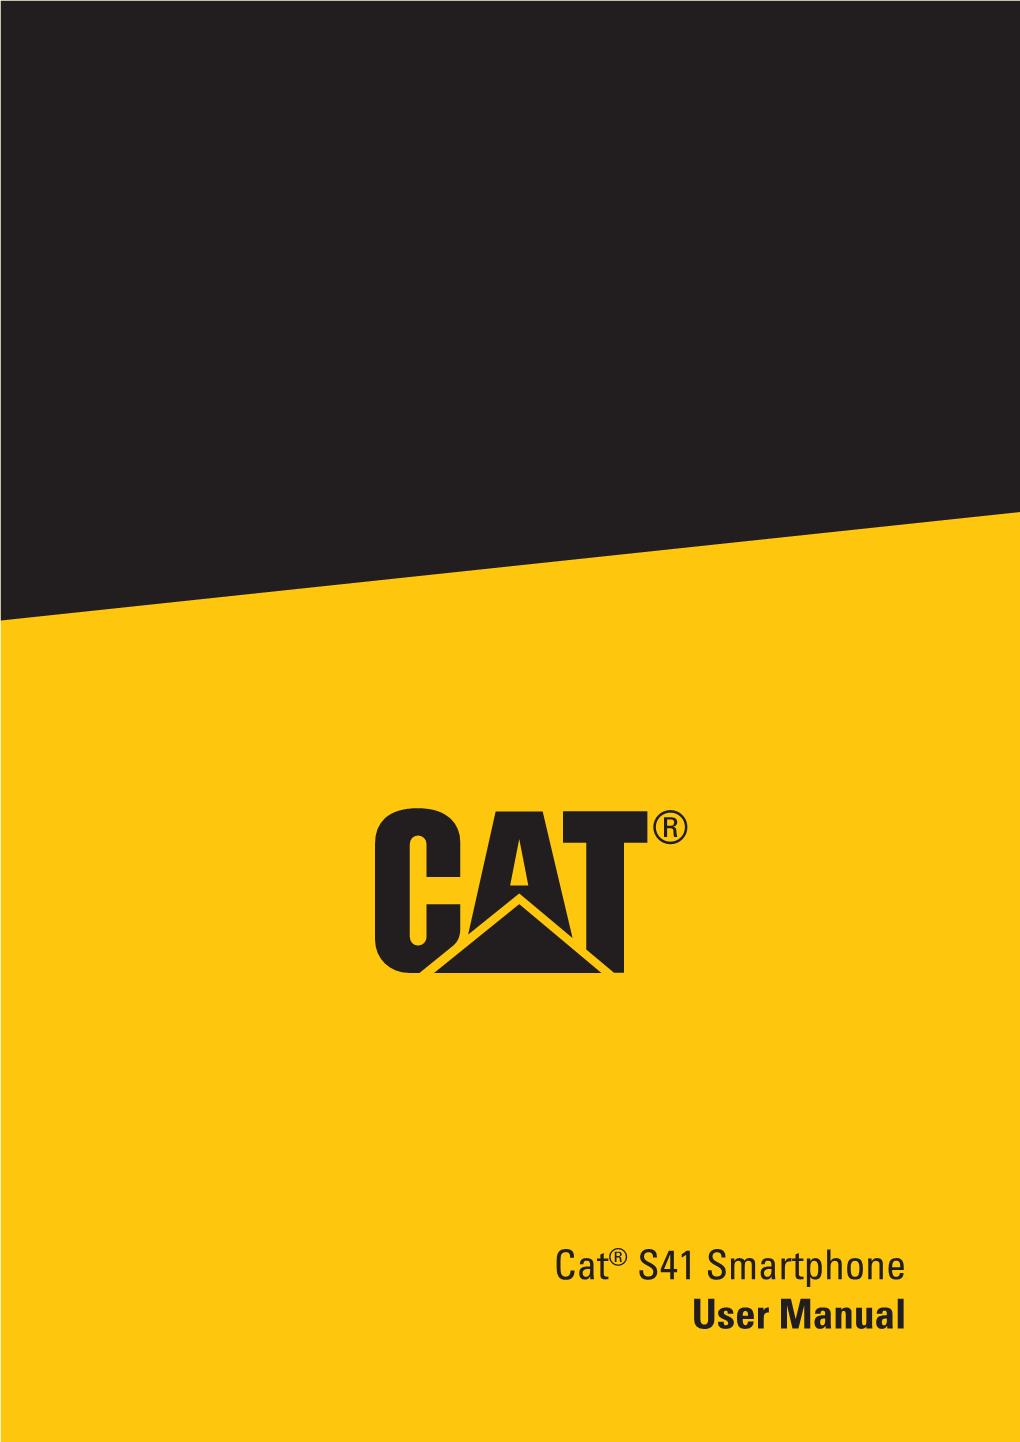 Cat® S41 Smartphone User Manual PLEASE READ BEFORE FIRST USE SAFETY LEGAL NOTICE PRECAUTIONS © 2017 Caterpillar